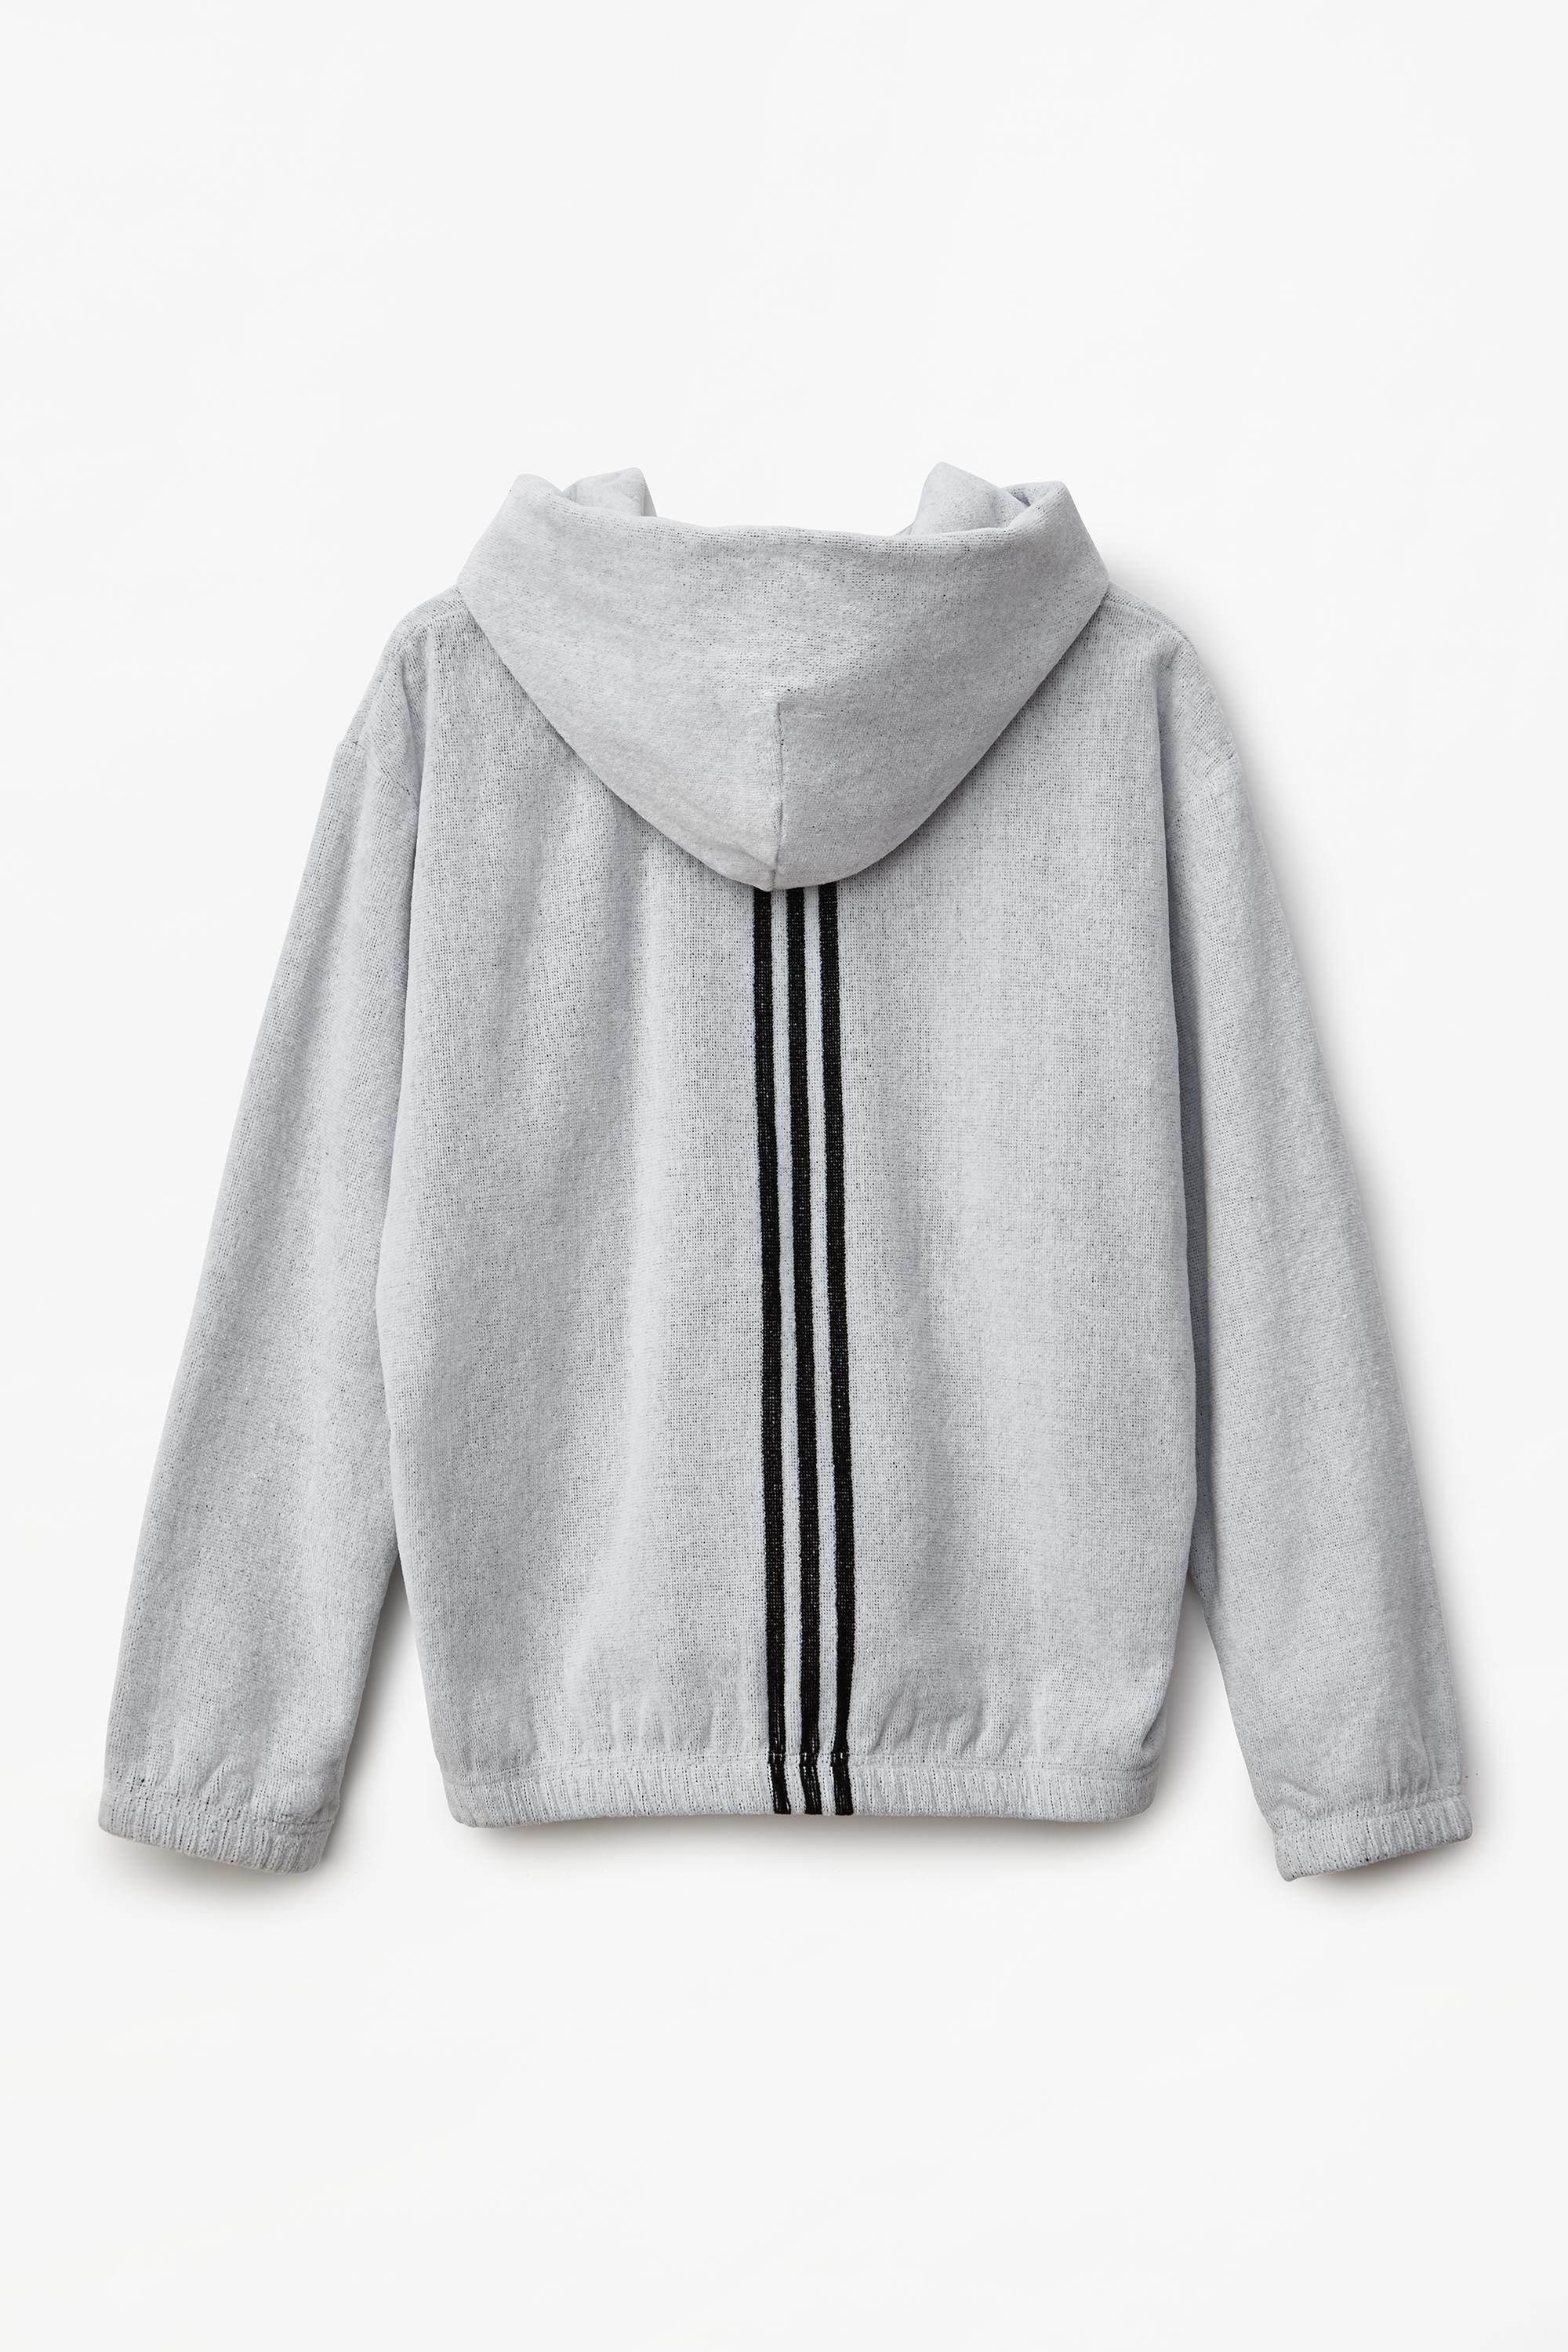 Alexander Wang Adidas Originals By Aw Towel Hoodie in White for Men | Lyst